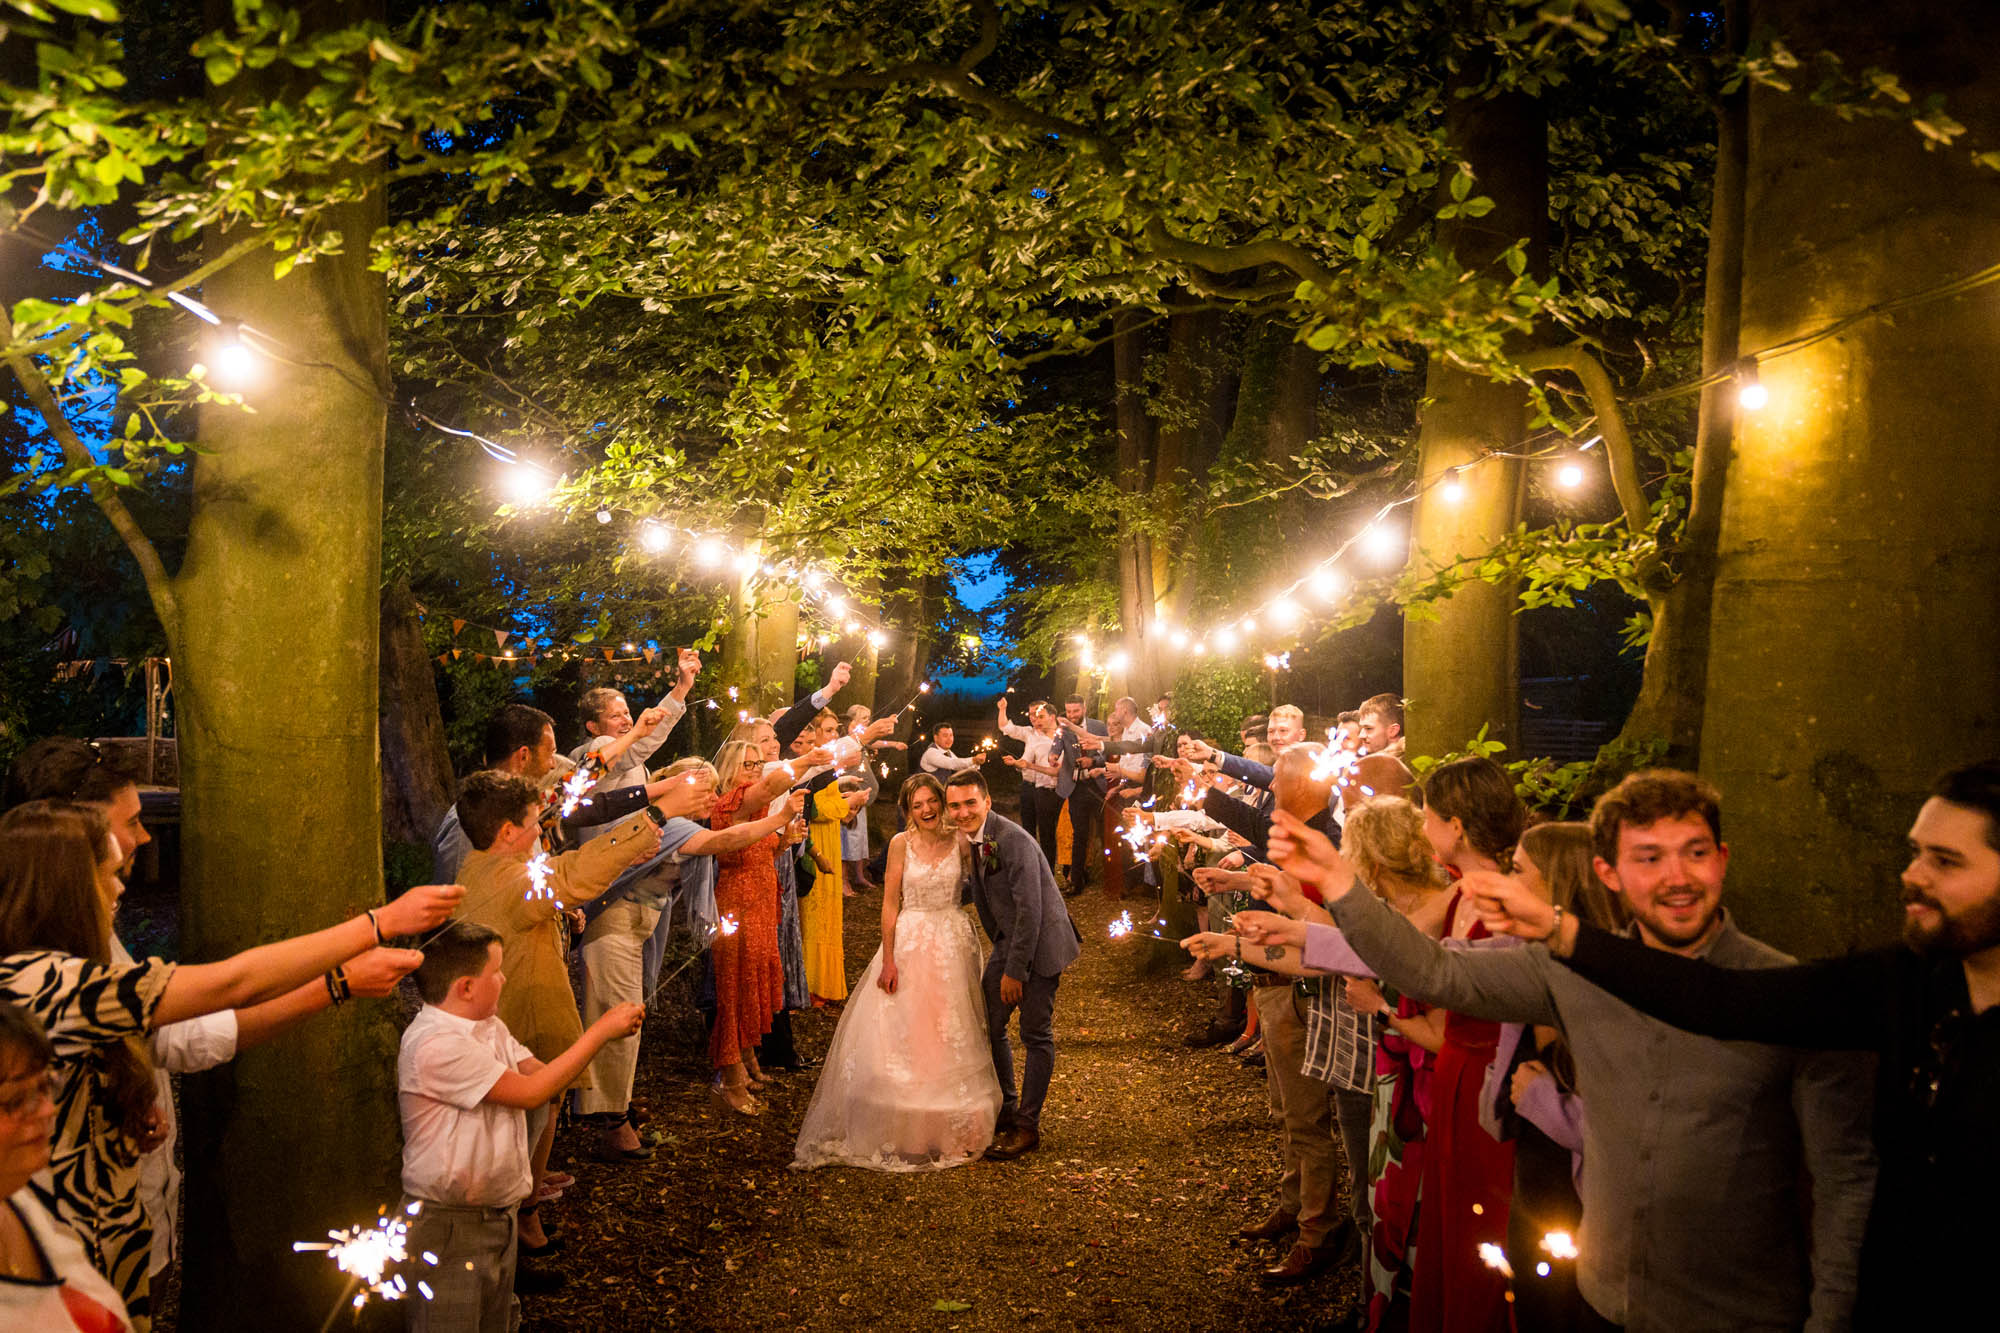 Newlyweds walking through their guests lined up with sparklers, in a woodland with festoon lighting